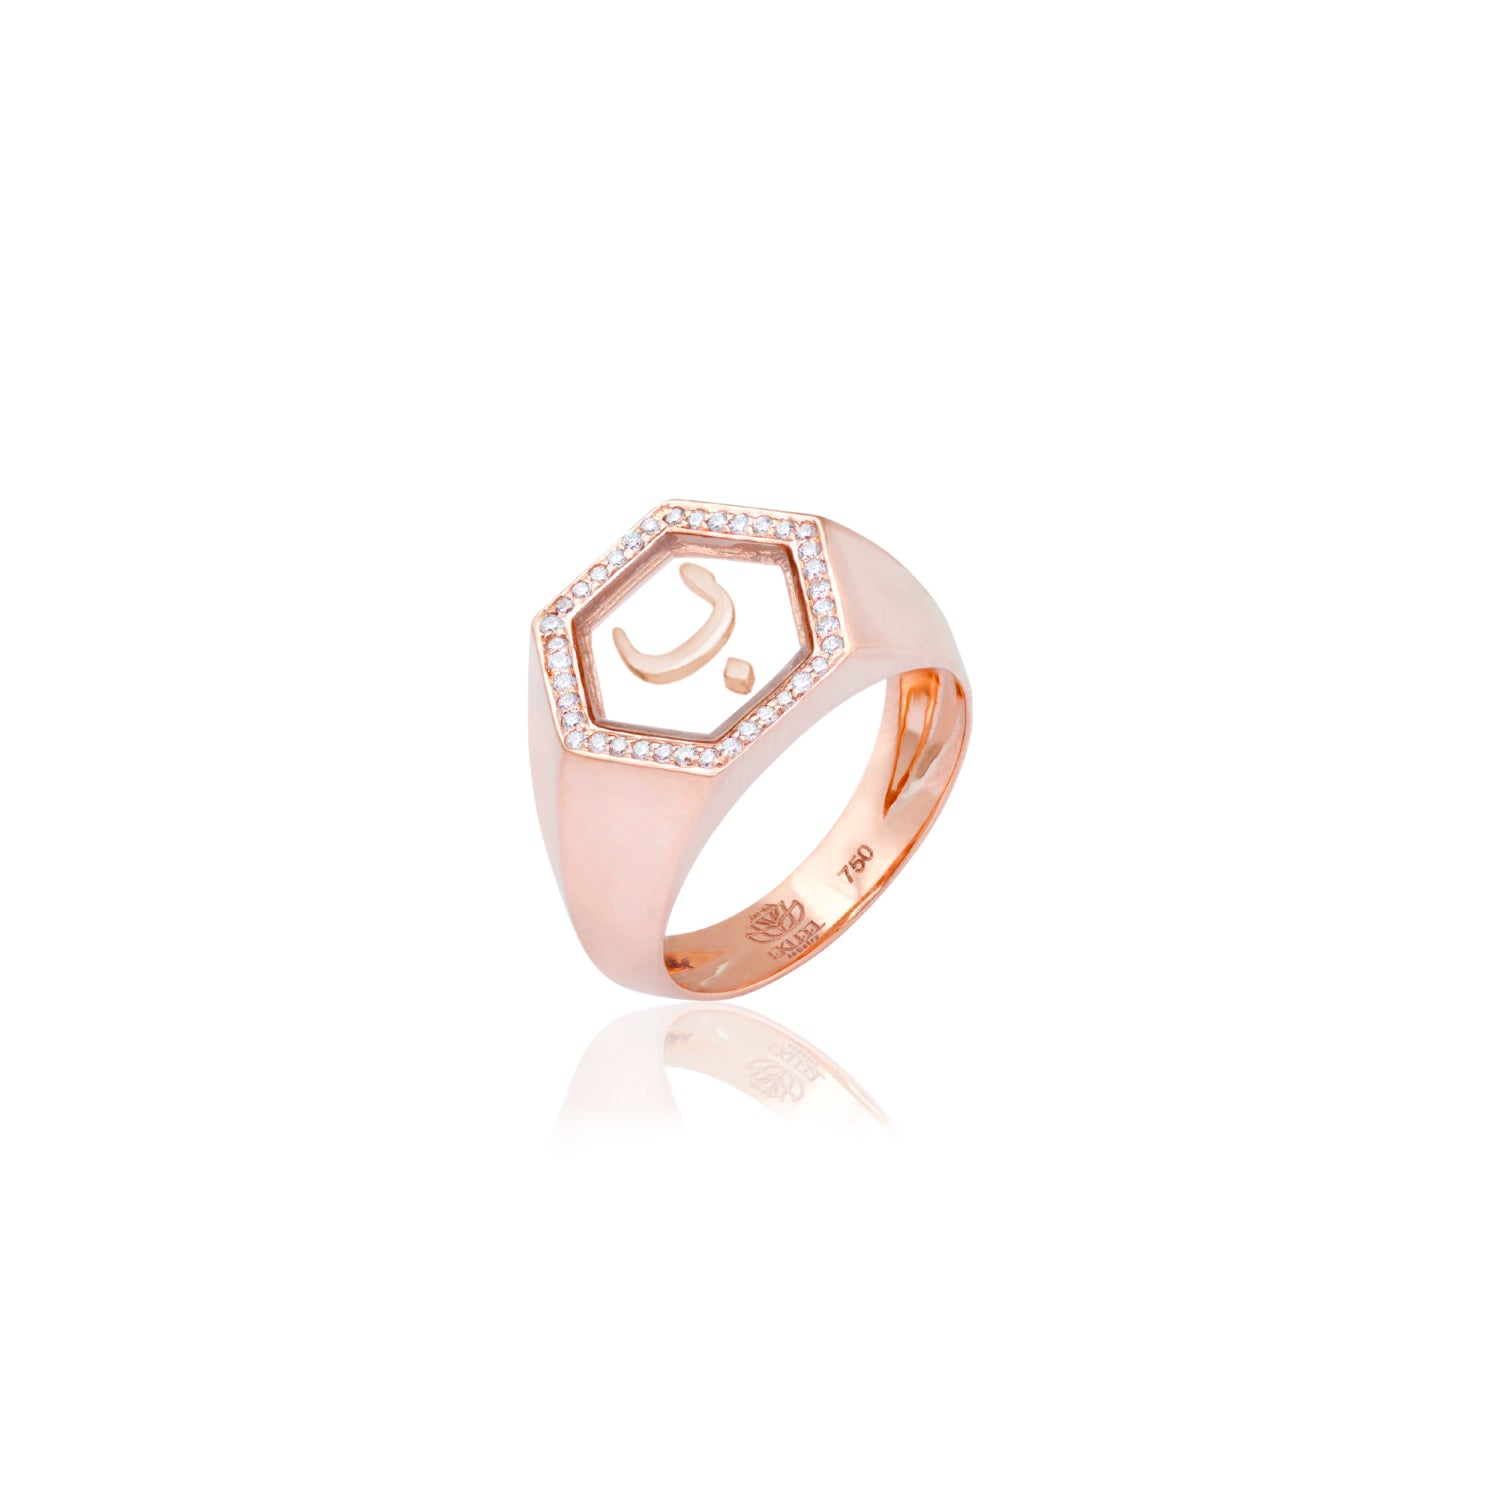 Qamoos 2.0 Letter ب Plexiglass and Diamond Signet Ring in Rose Gold